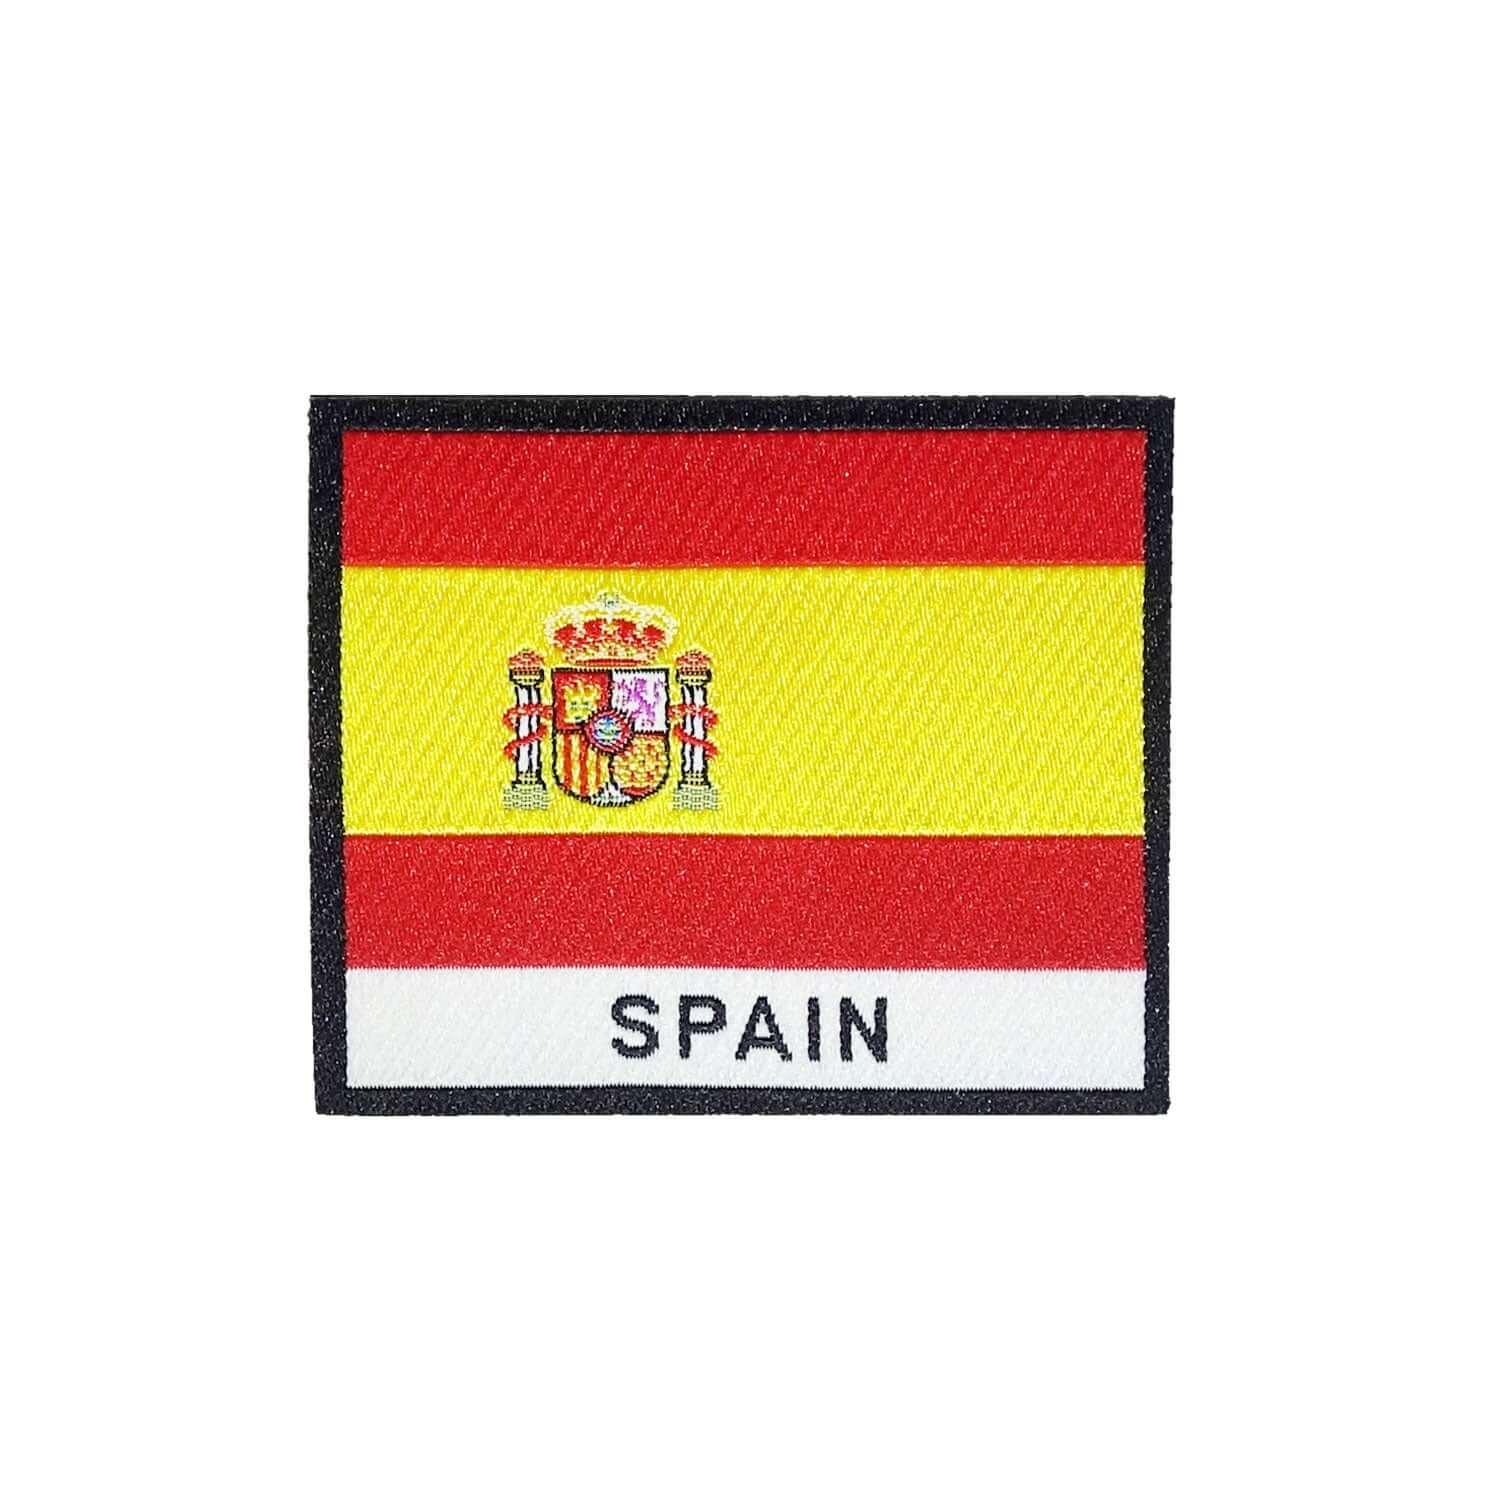 Spain Flag Black Frame Iron On Patch - Rocket Factory Apparel